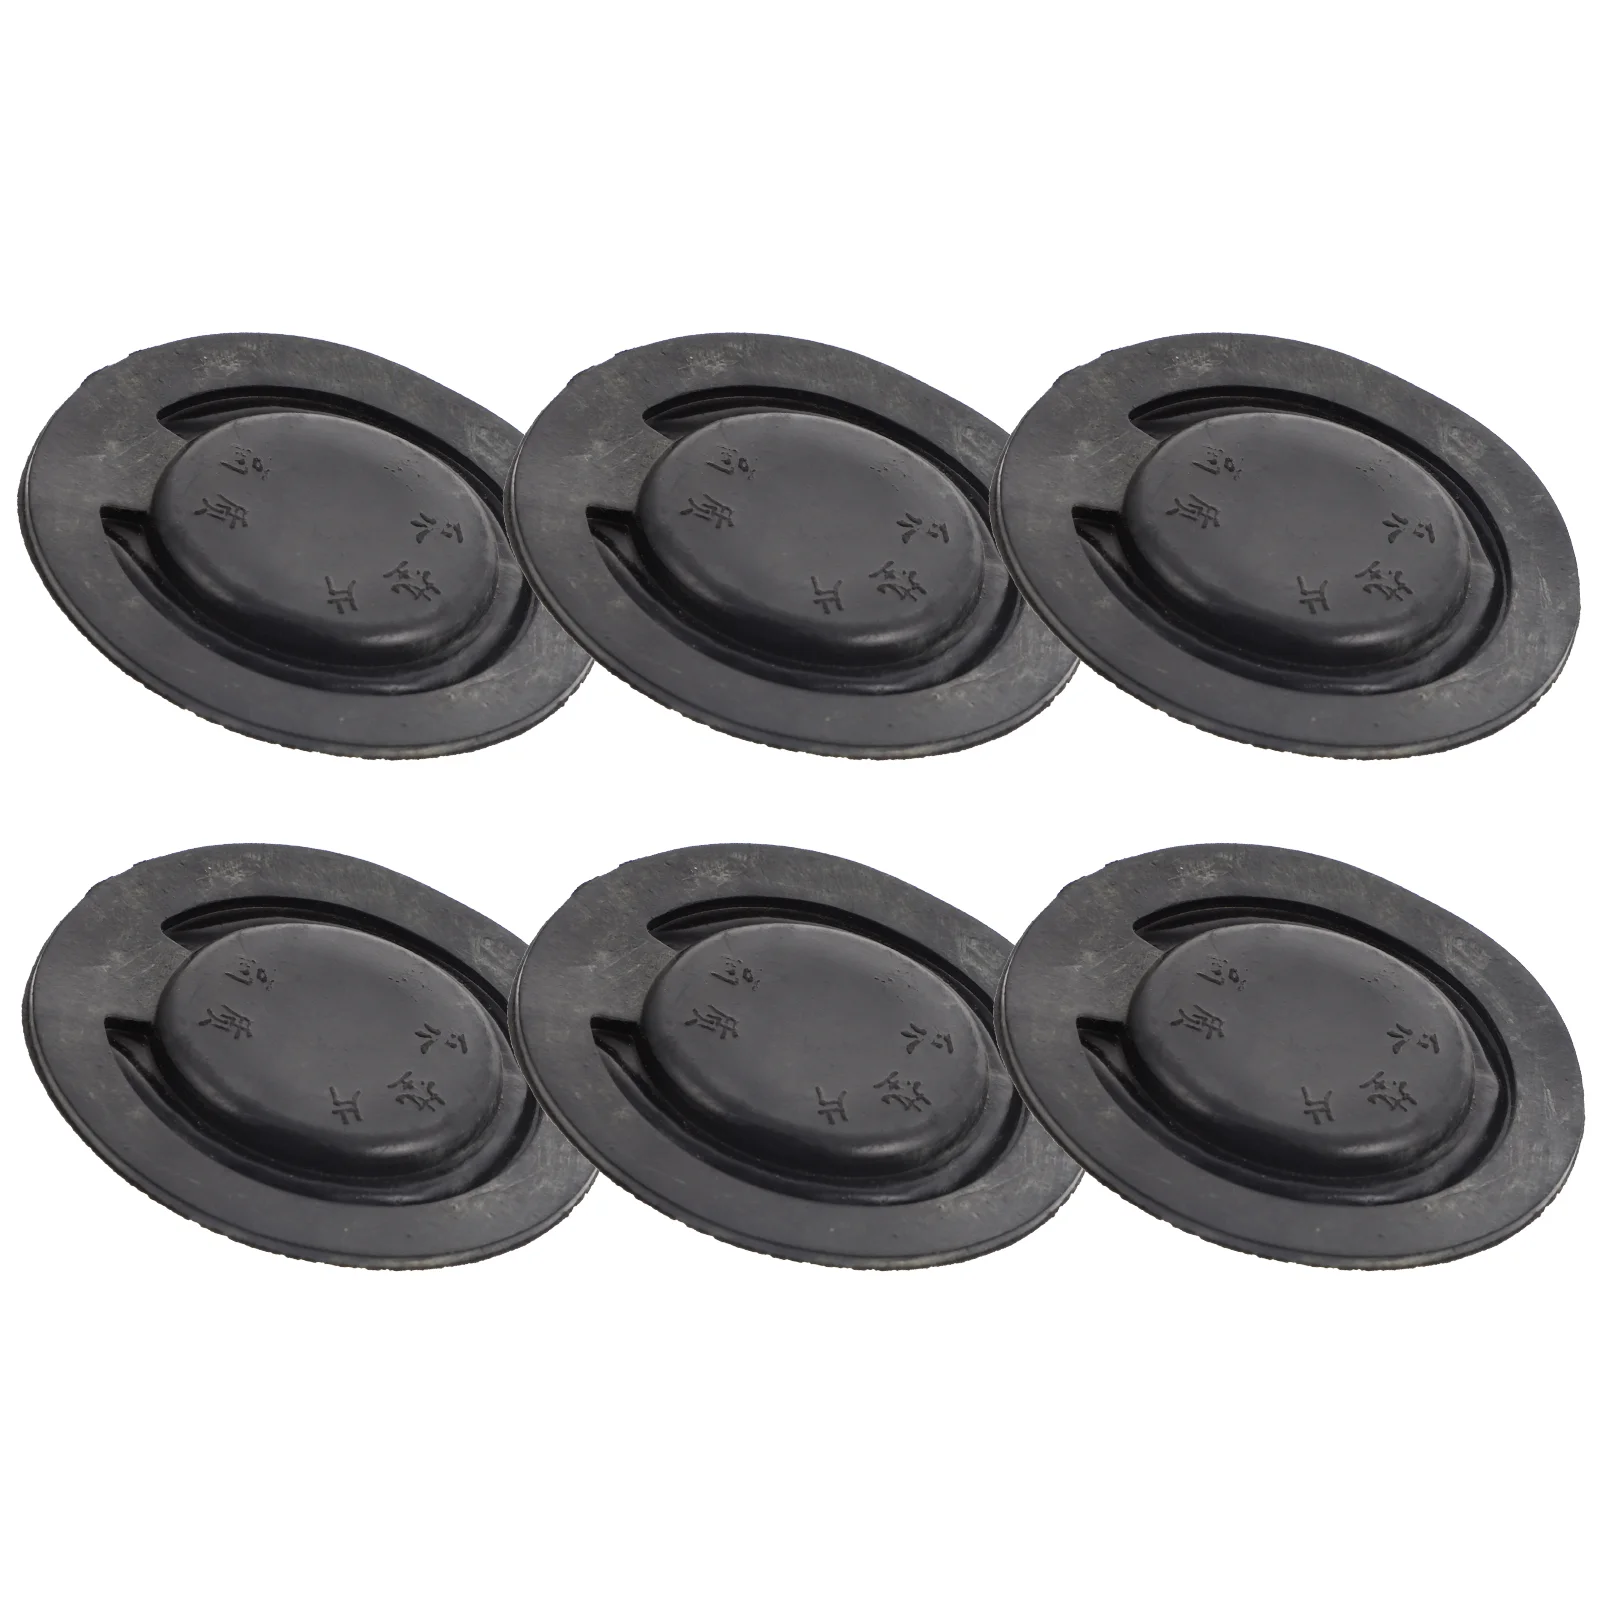 

6Pcs Professional Replacement Practical Pump Gaskets Universal Cup Water Pump Cushions for Replace